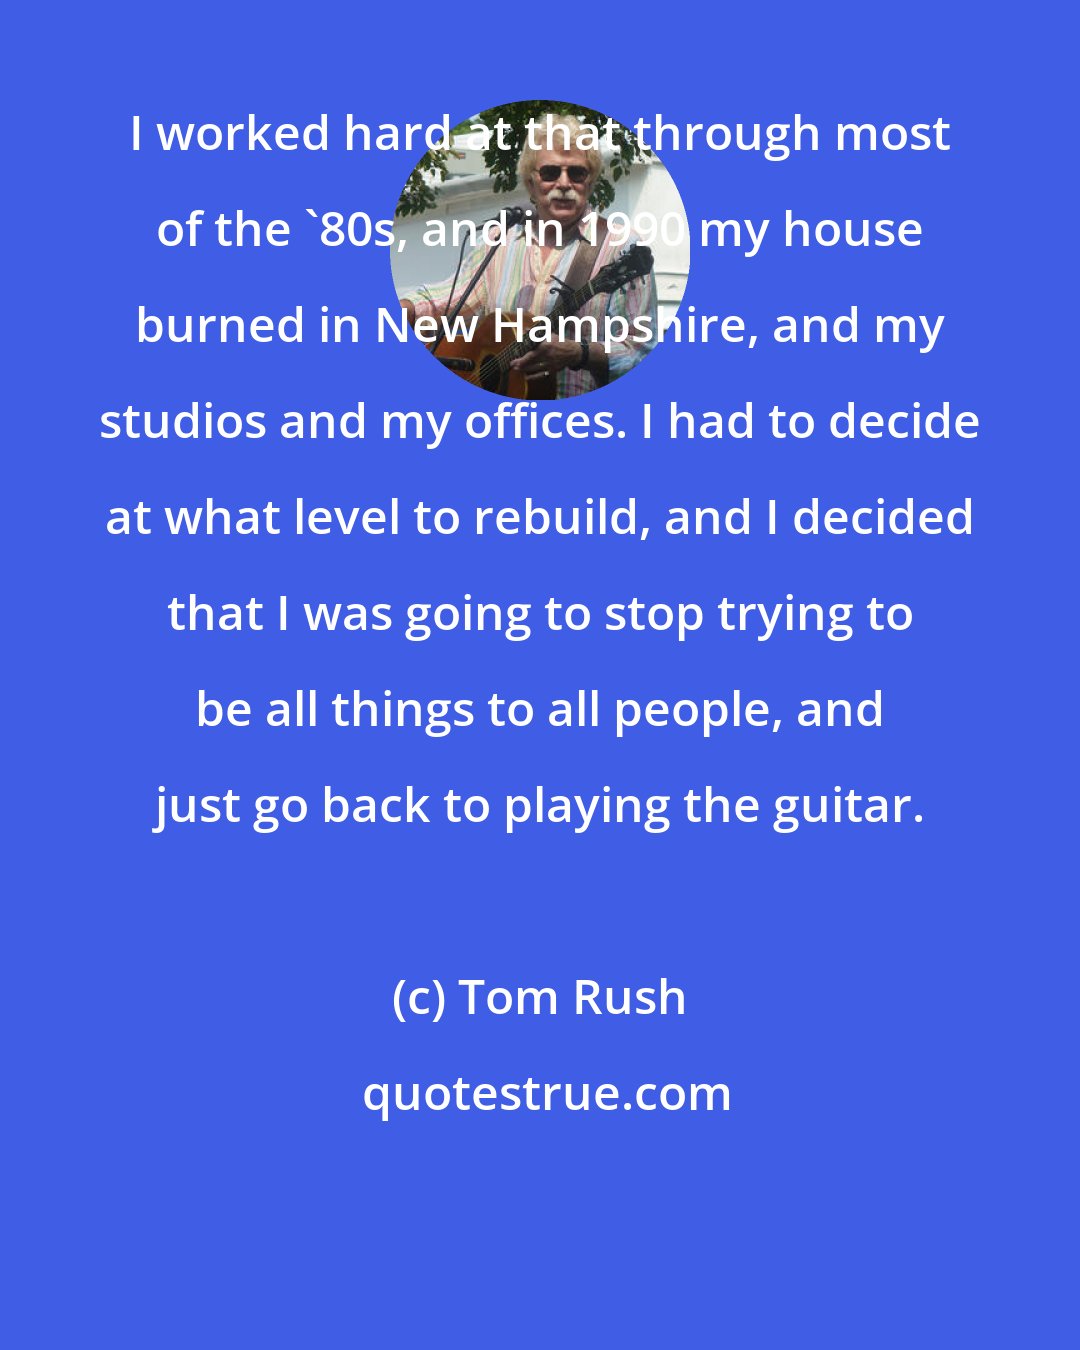 Tom Rush: I worked hard at that through most of the '80s, and in 1990 my house burned in New Hampshire, and my studios and my offices. I had to decide at what level to rebuild, and I decided that I was going to stop trying to be all things to all people, and just go back to playing the guitar.